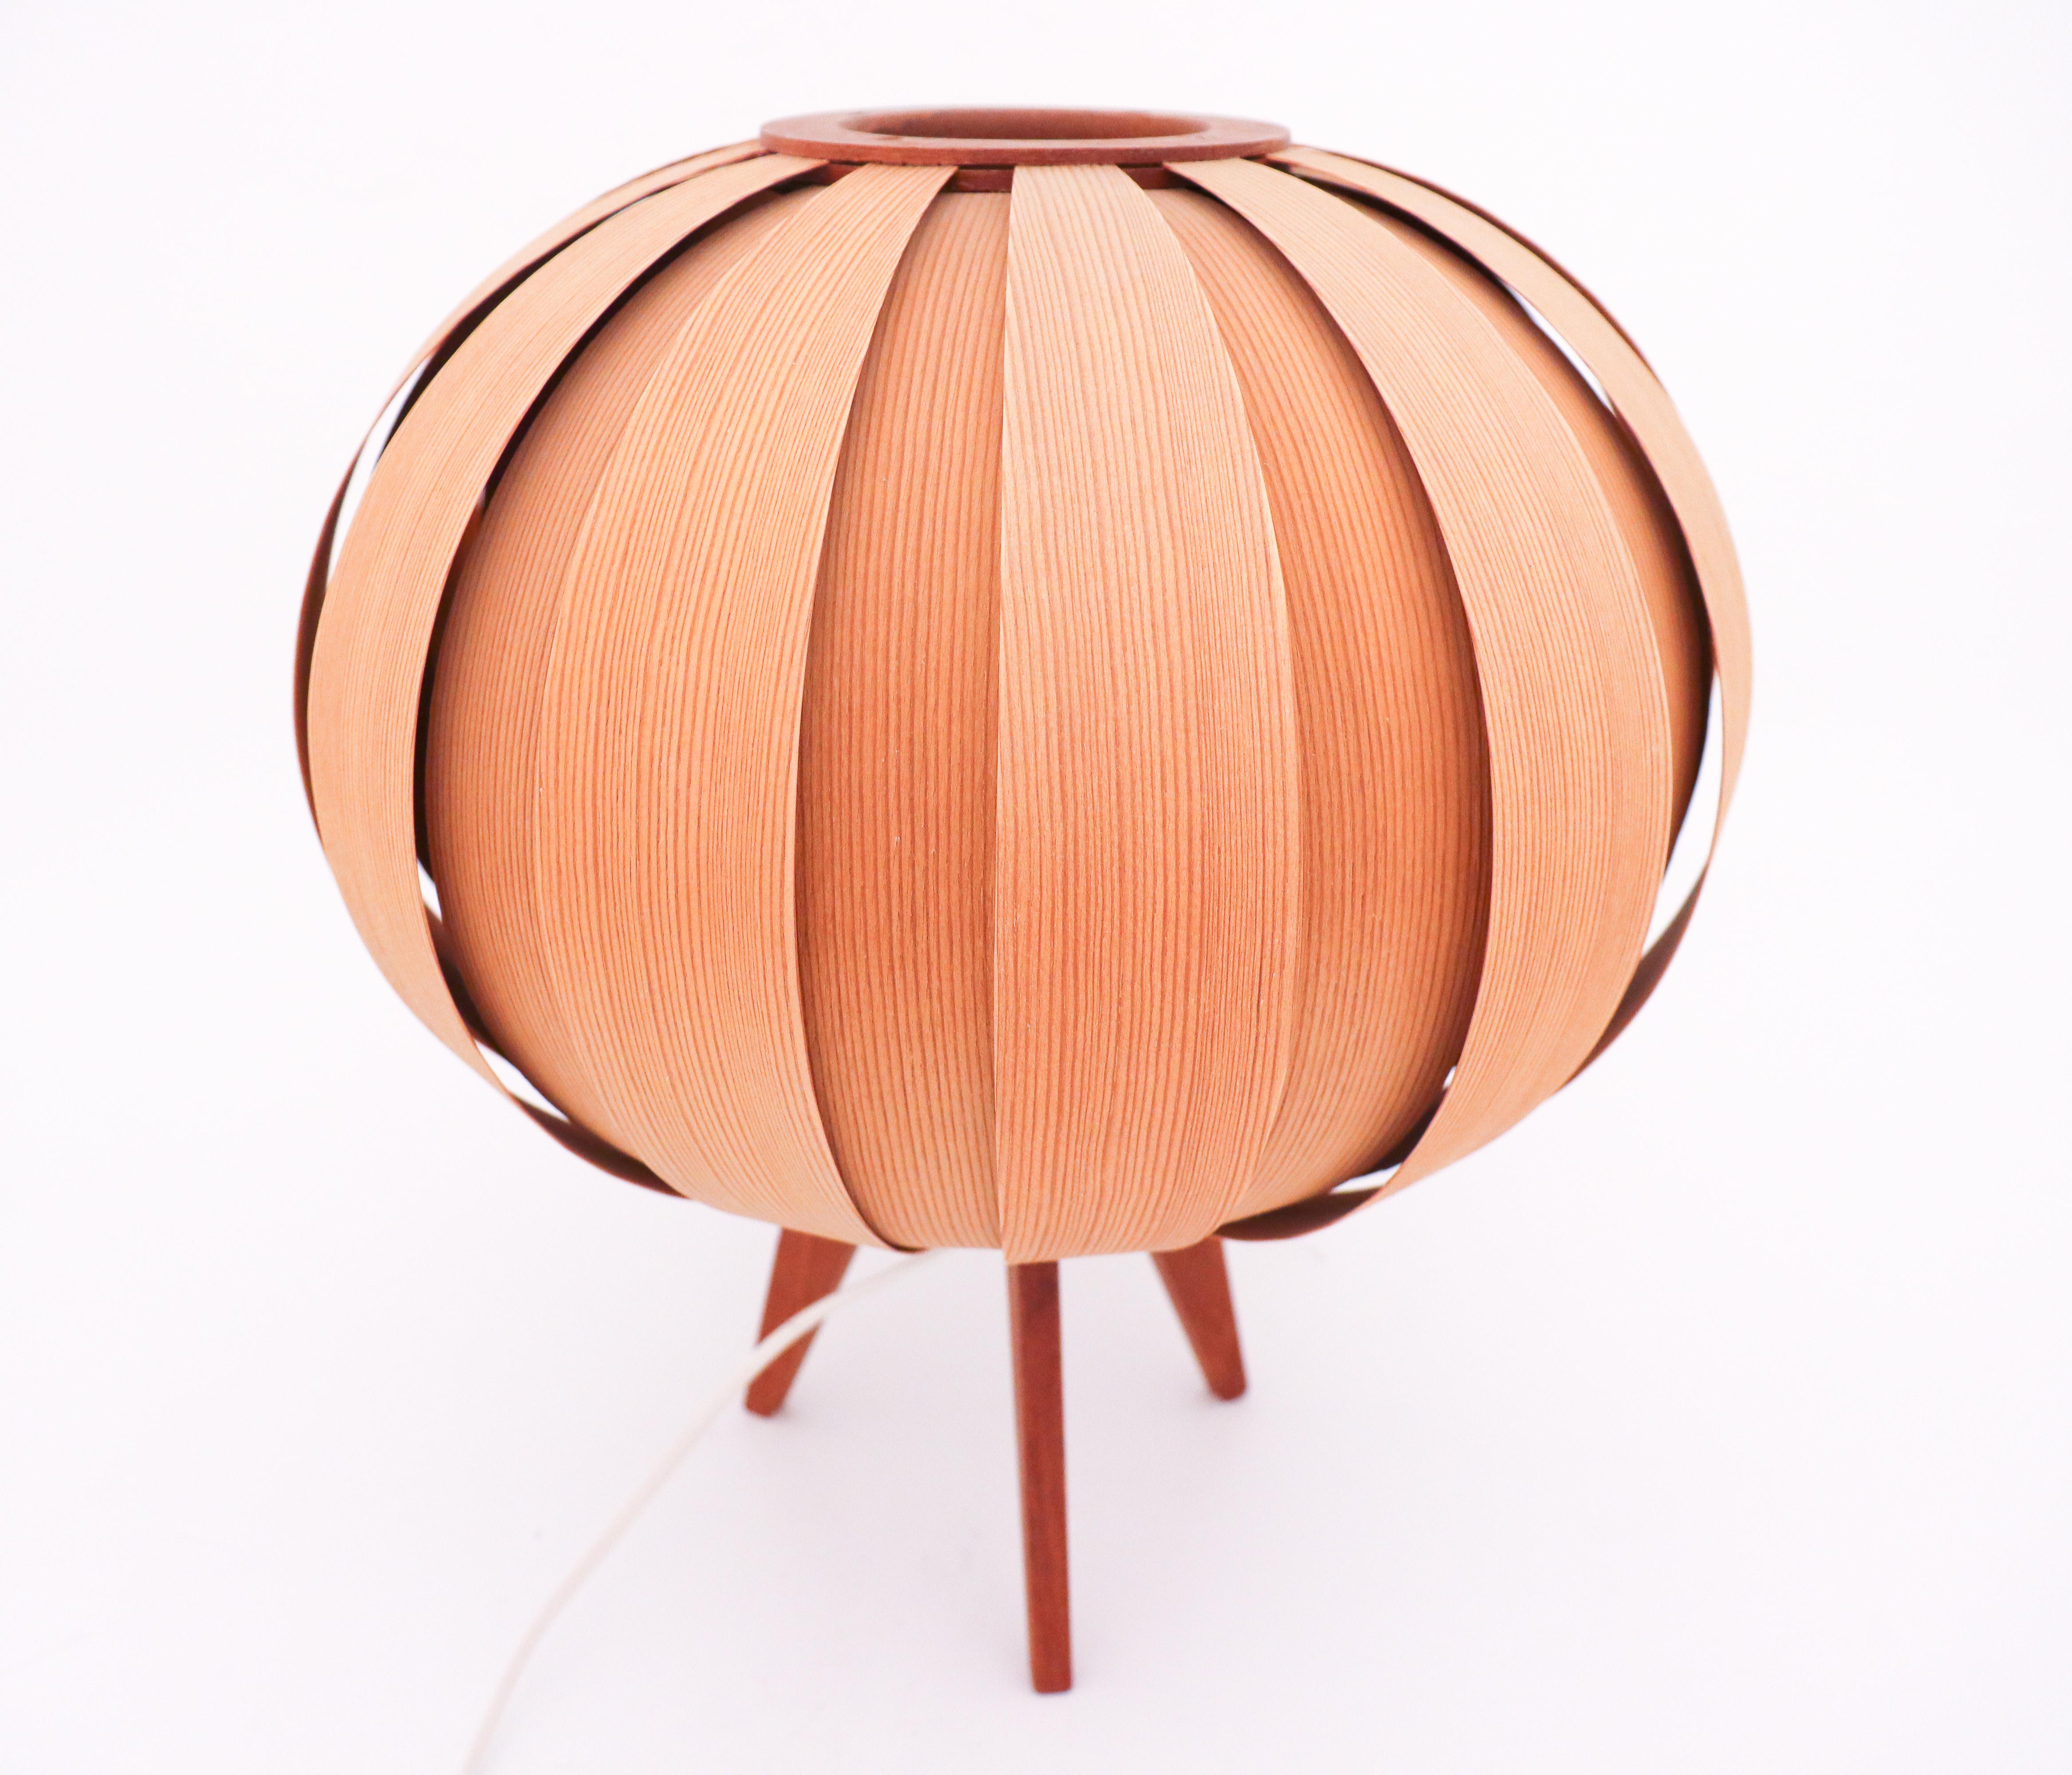 A bentwood lamp made in pine designed by Hans-Agne Jakobsson designed by Ellysett AB in 1960s. It is in very good condition.